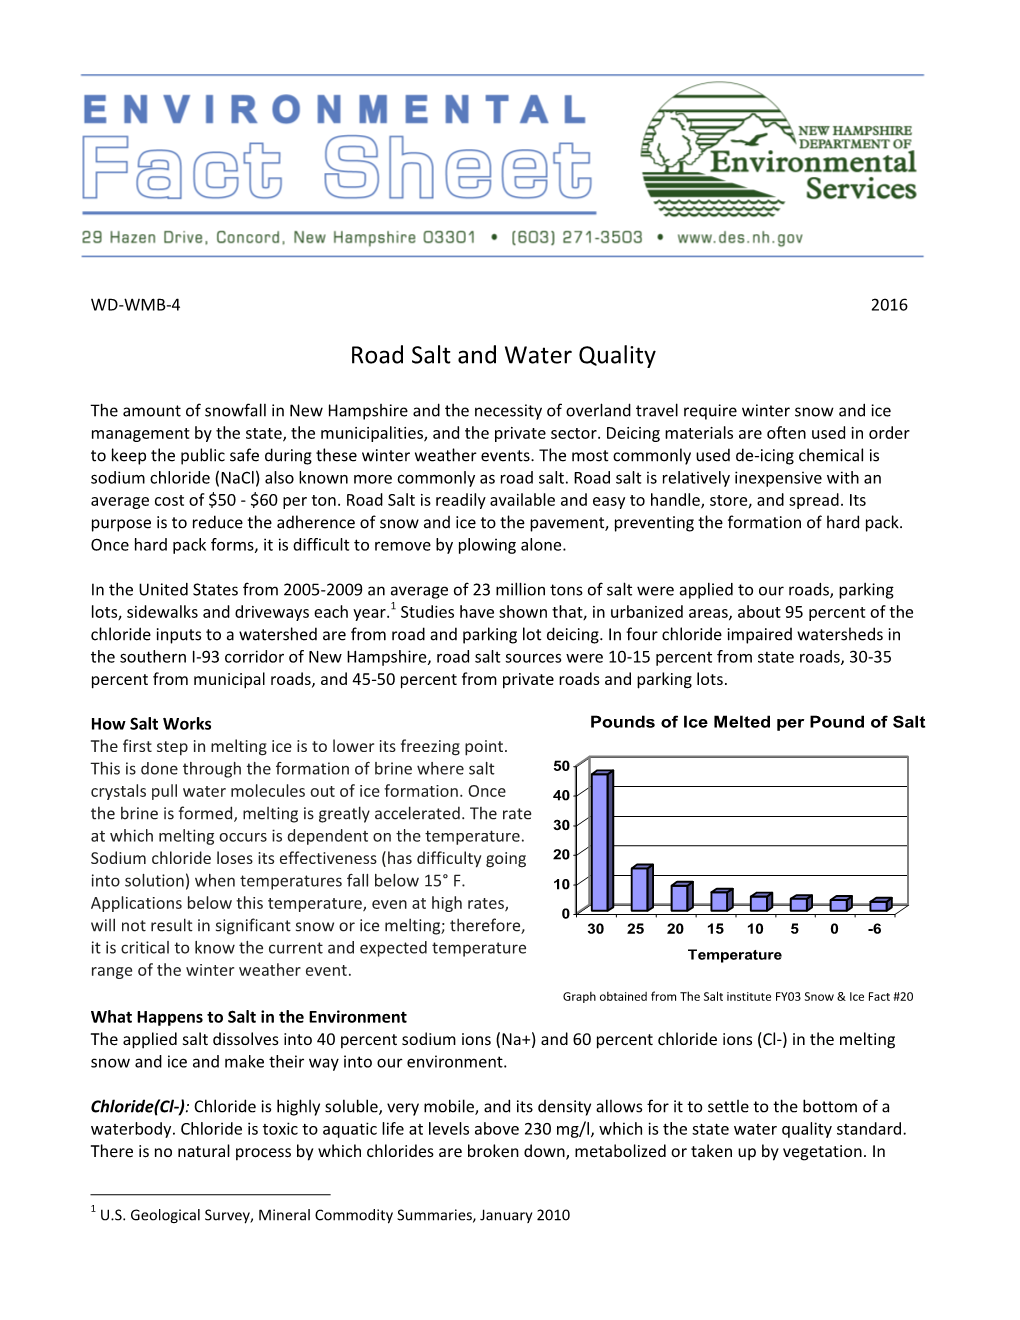 Road Salt and Water Quality